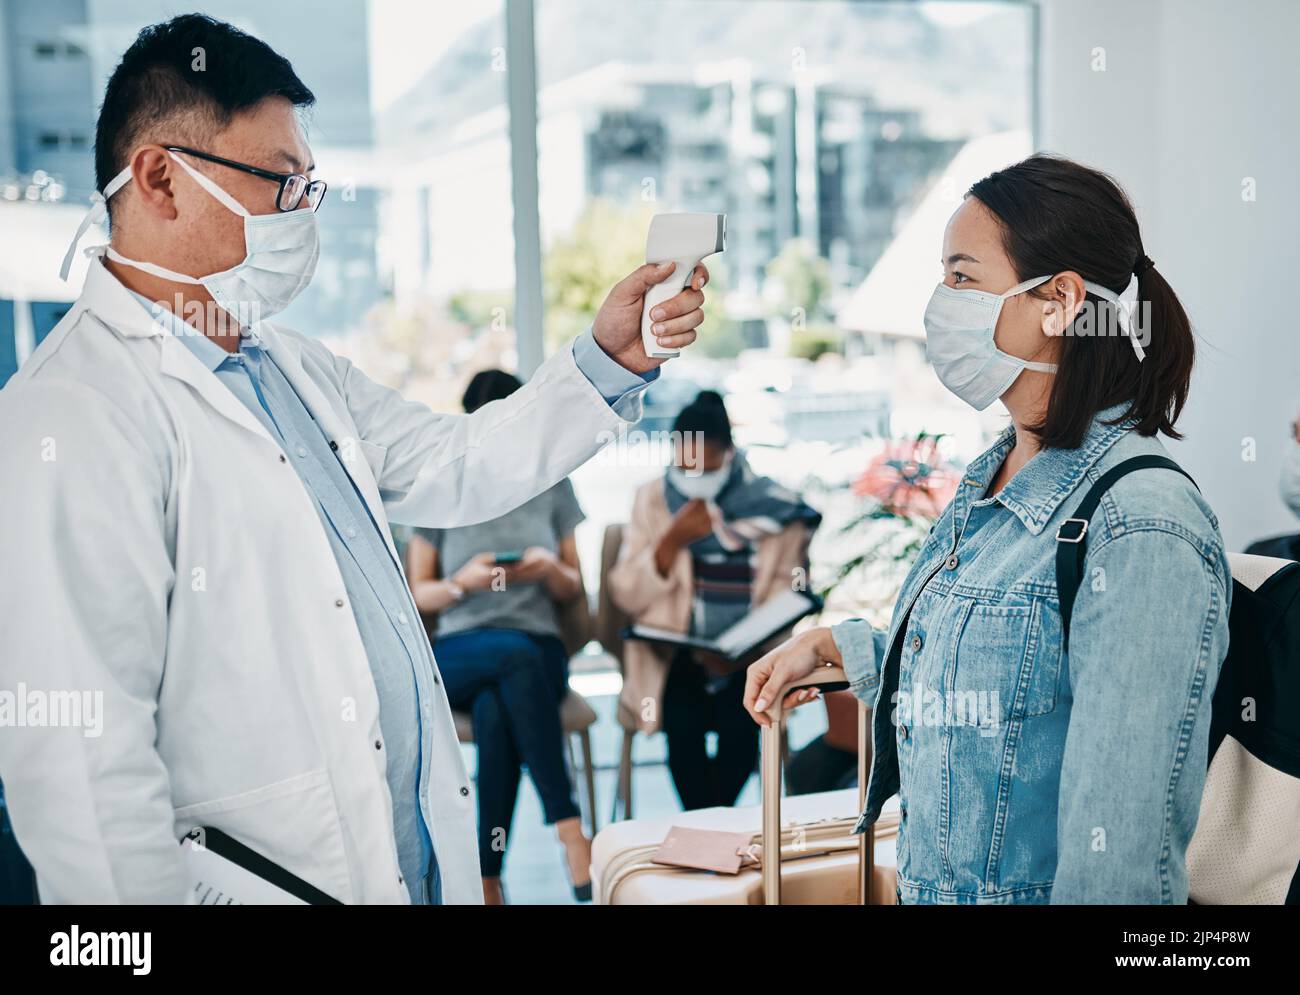 Covid traveling with a doctor taking temperature of a woman wearing a mask in an airport for safety in a pandemic. Healthcare professional with an Stock Photo